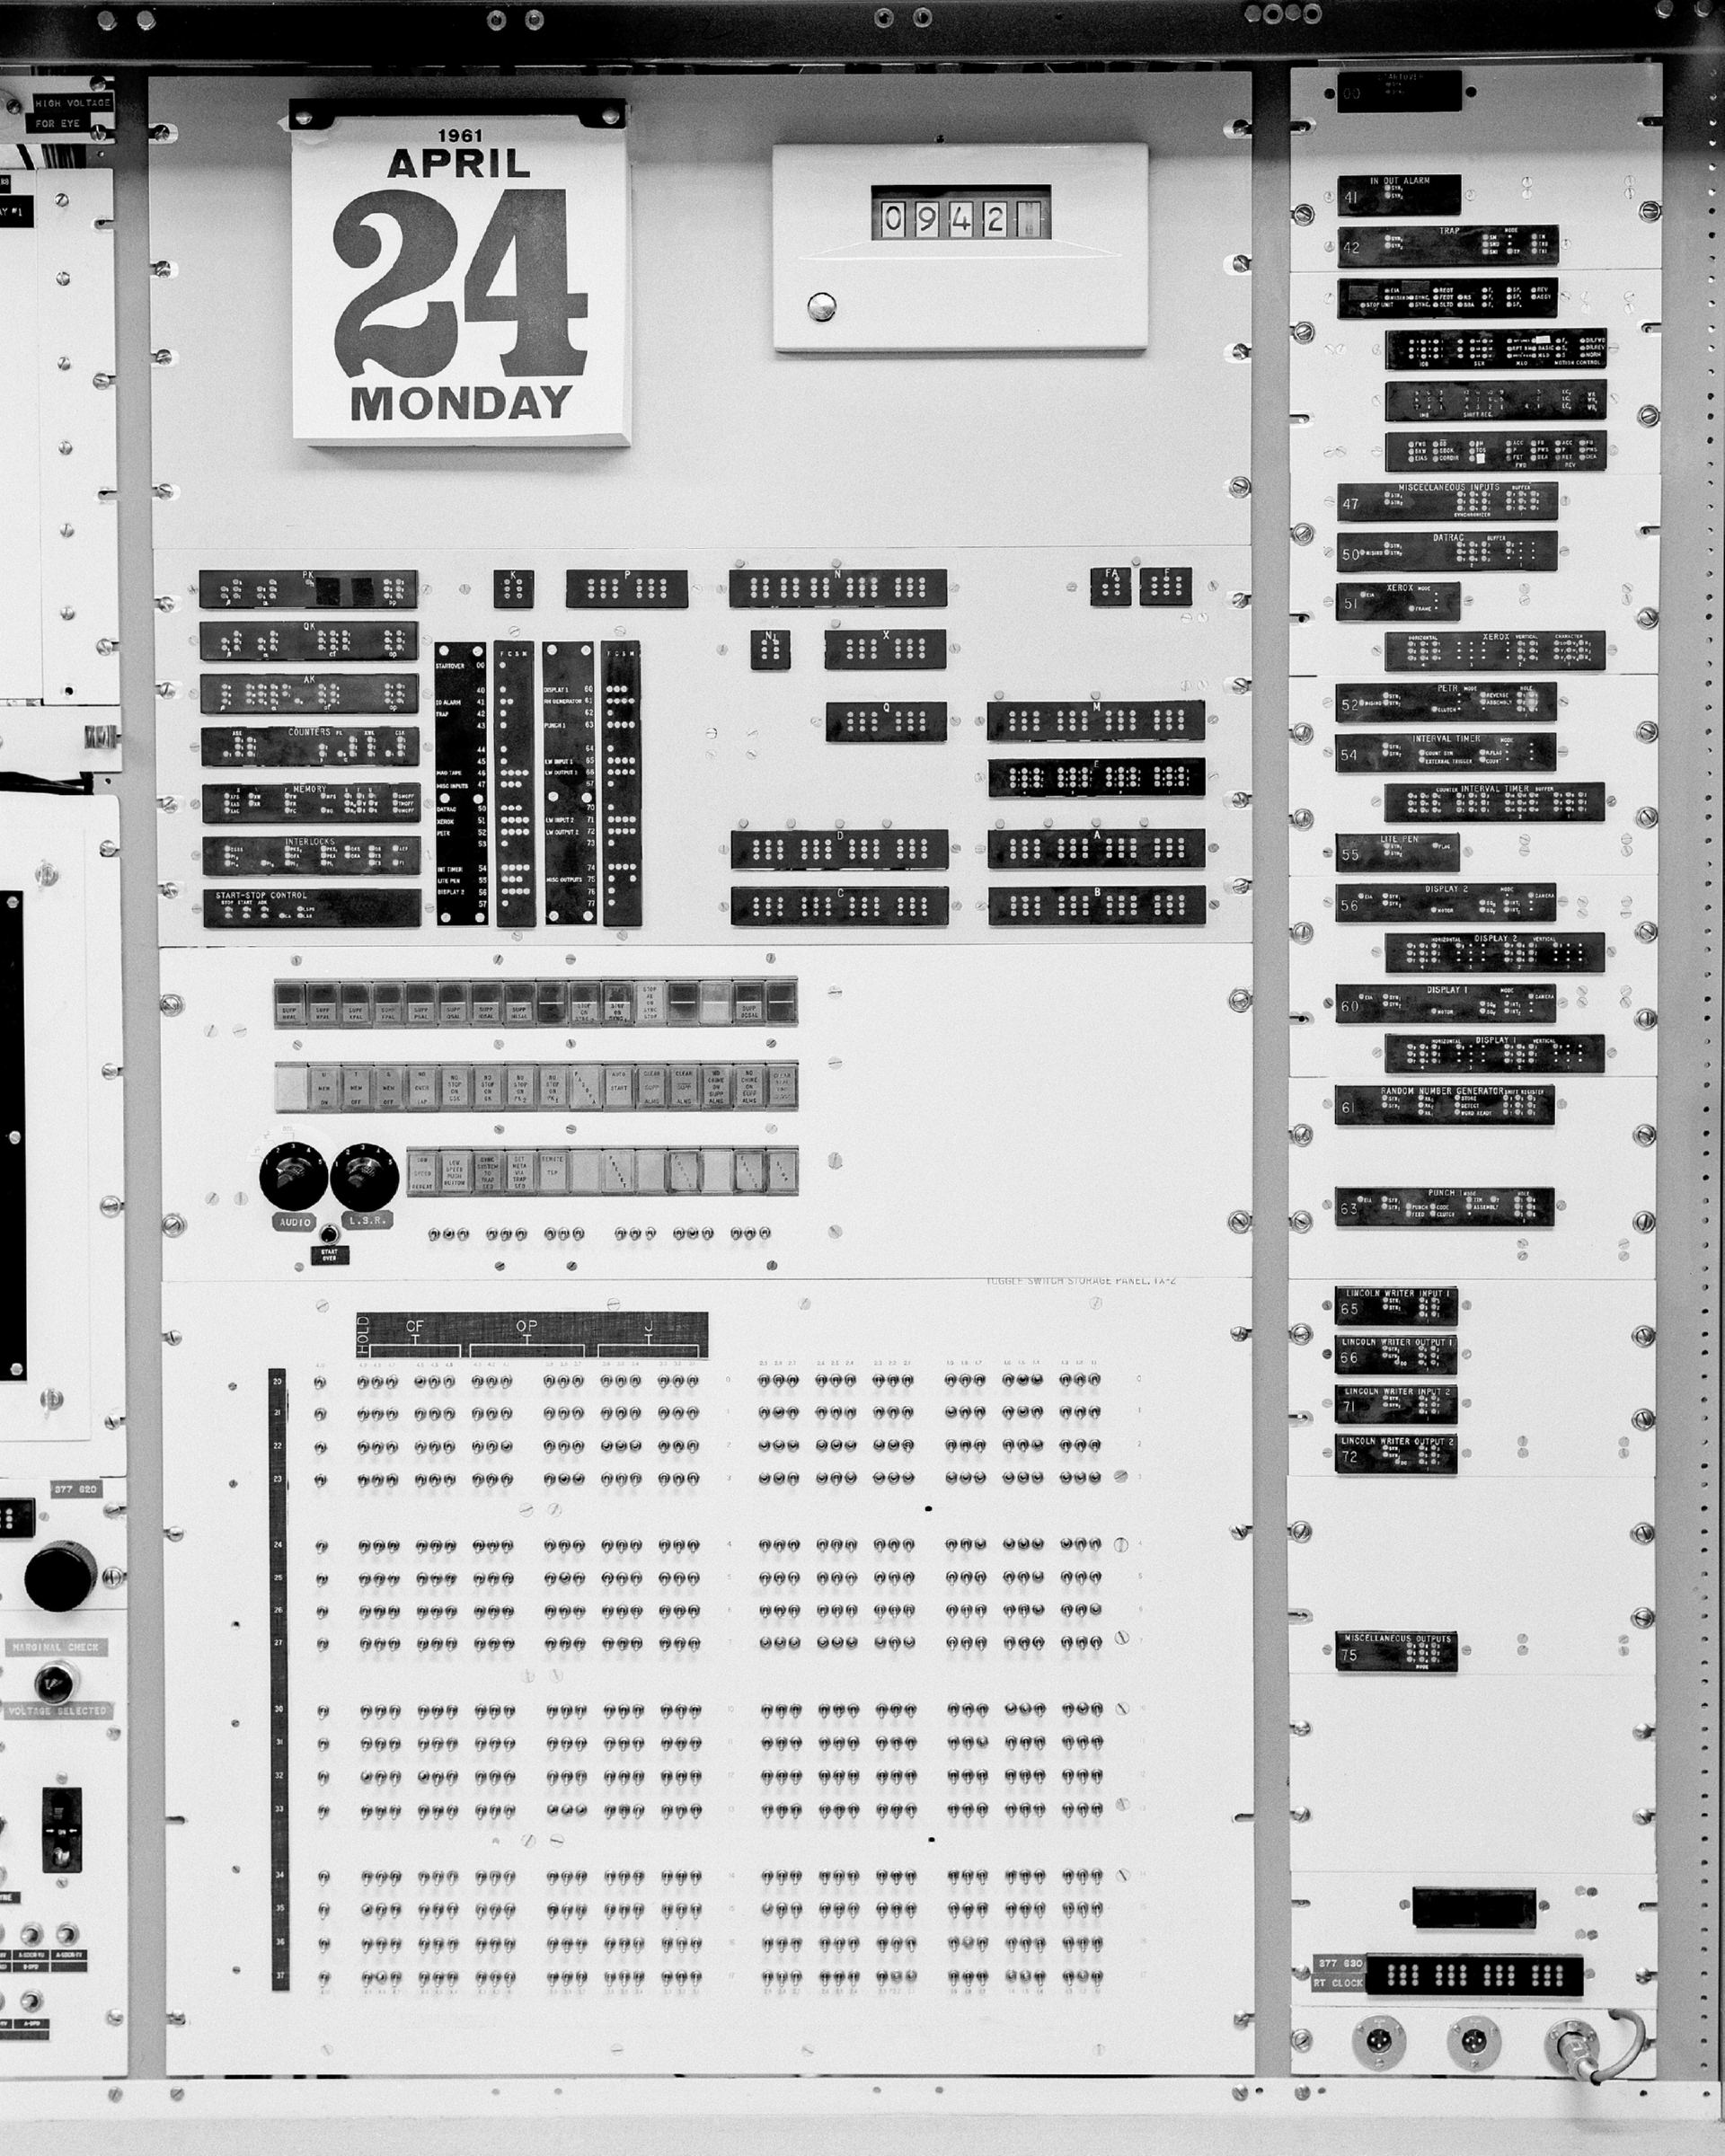 P91-113: 03/28/1961, The toggle switch storage panel and system
registers are on the left of this panel and I/O status registers are
on the right.